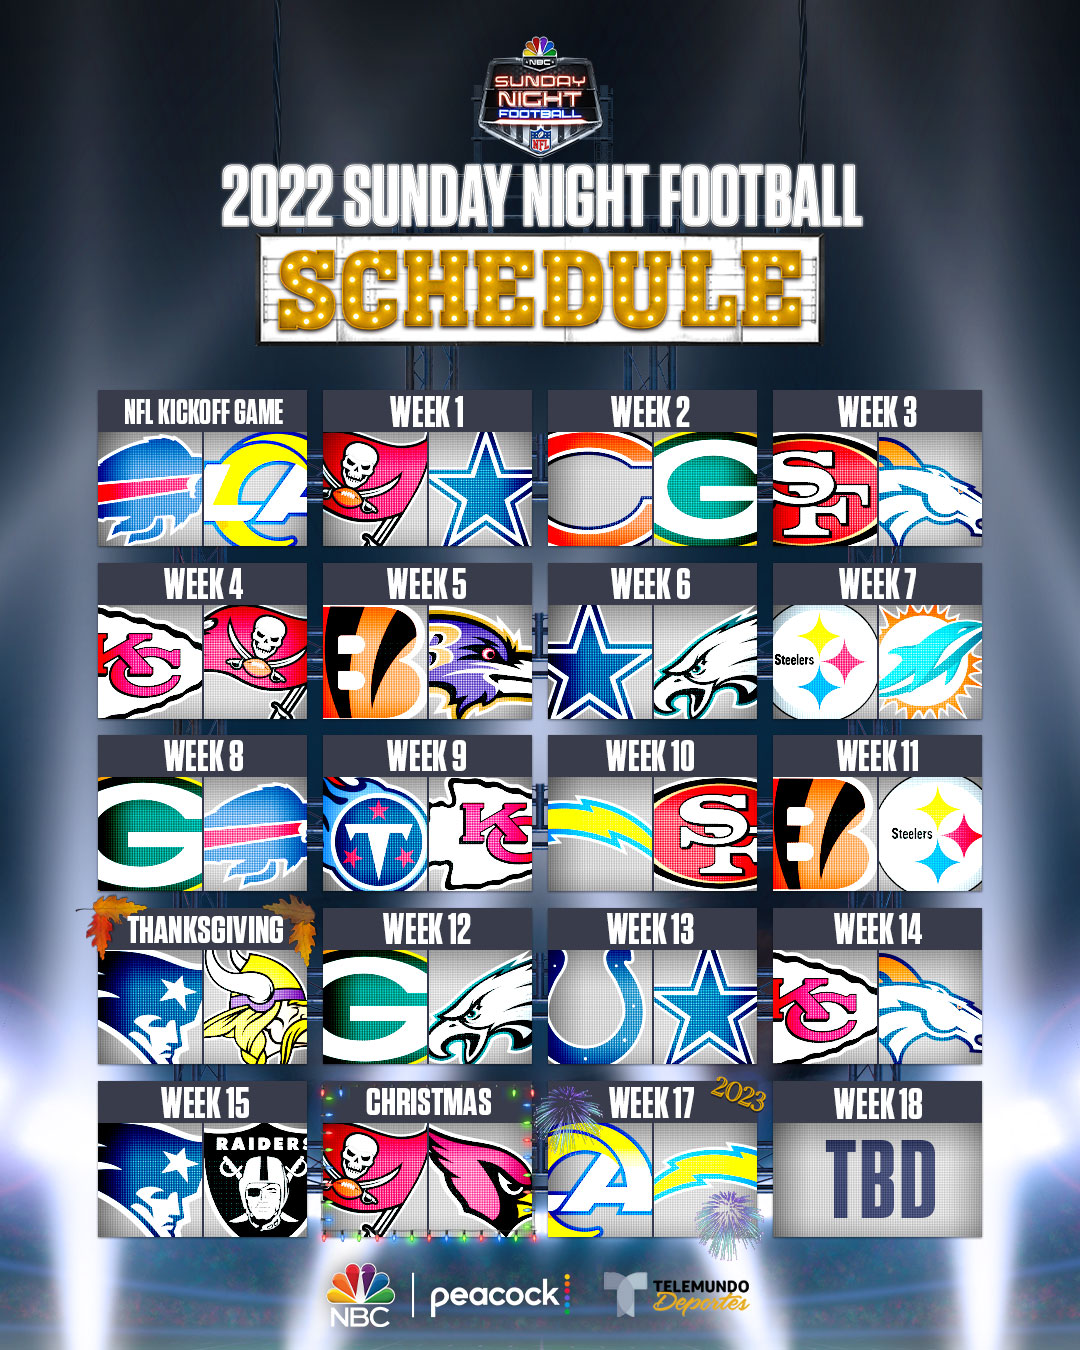 who's playing tonight on nfl thursday night football